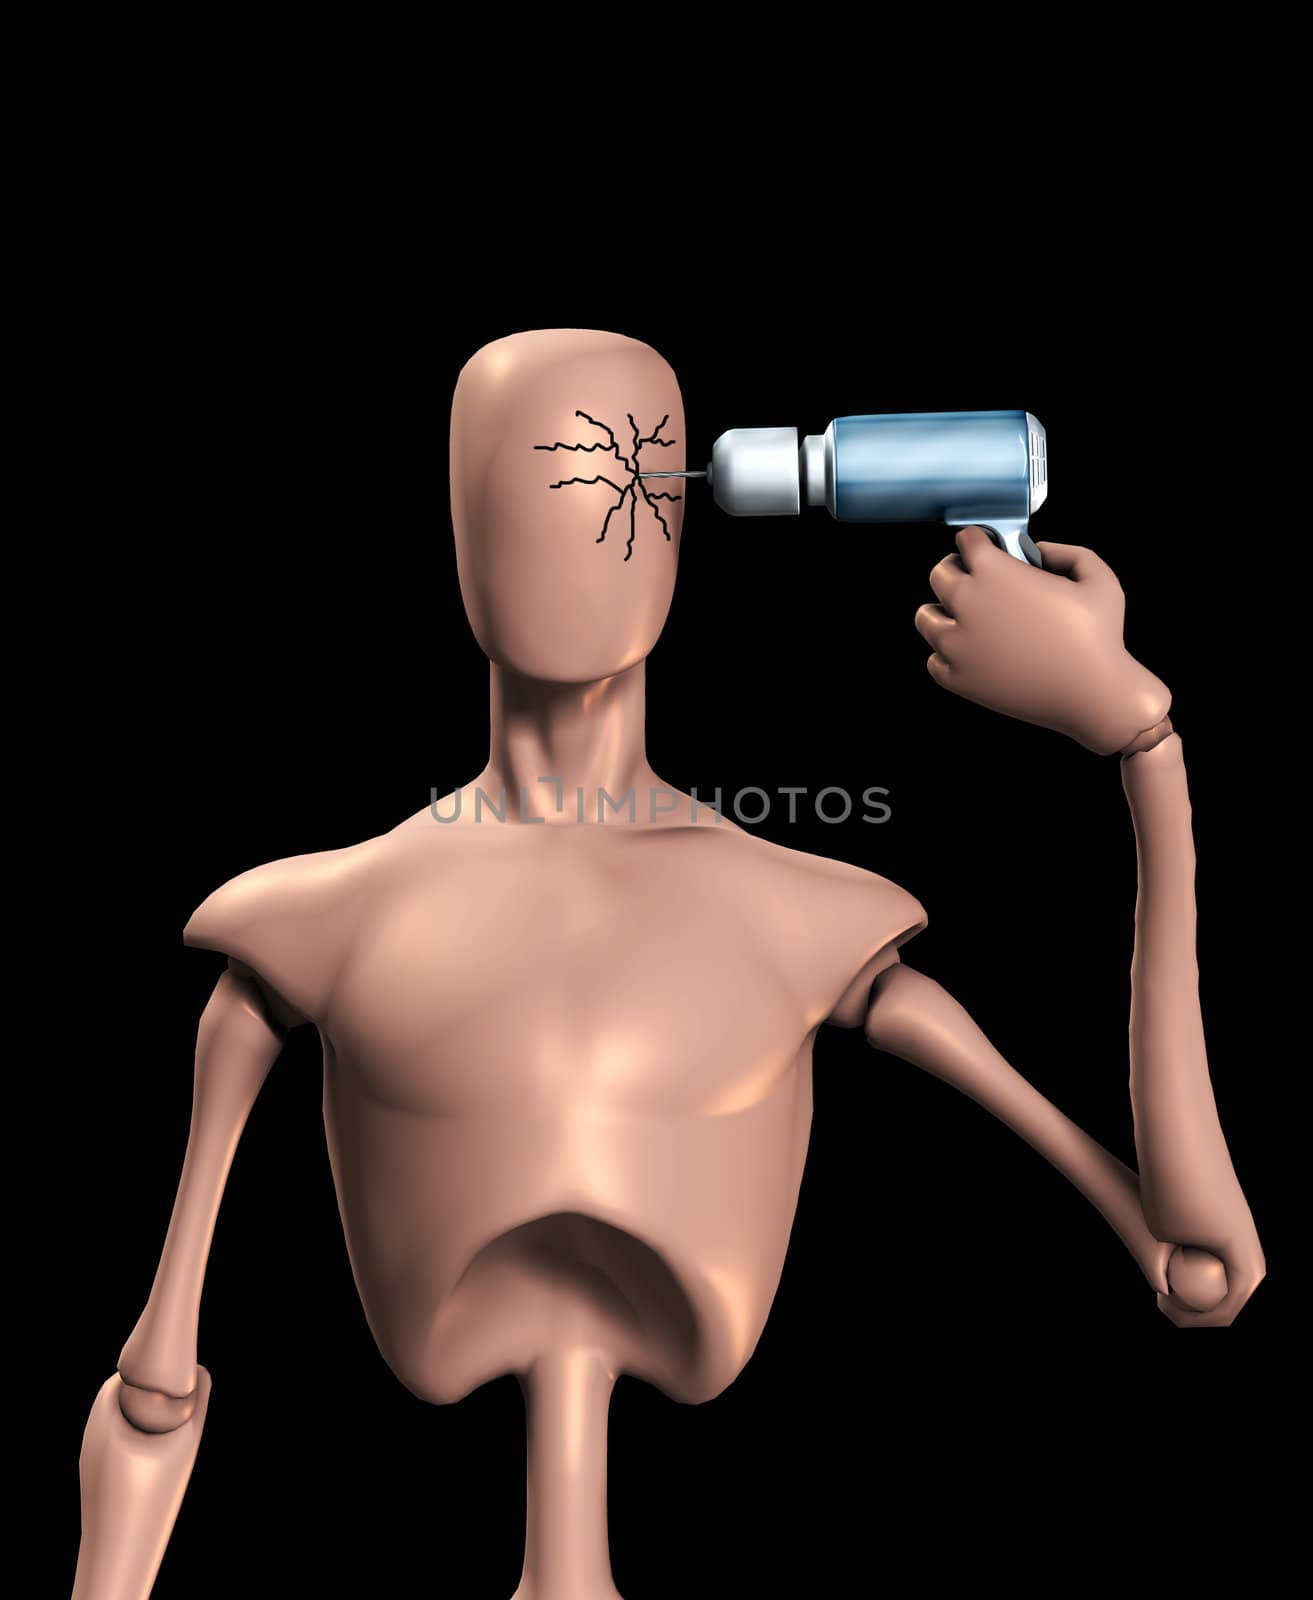 
Conceptual image showing a faceless figure drilling and cracking its head.